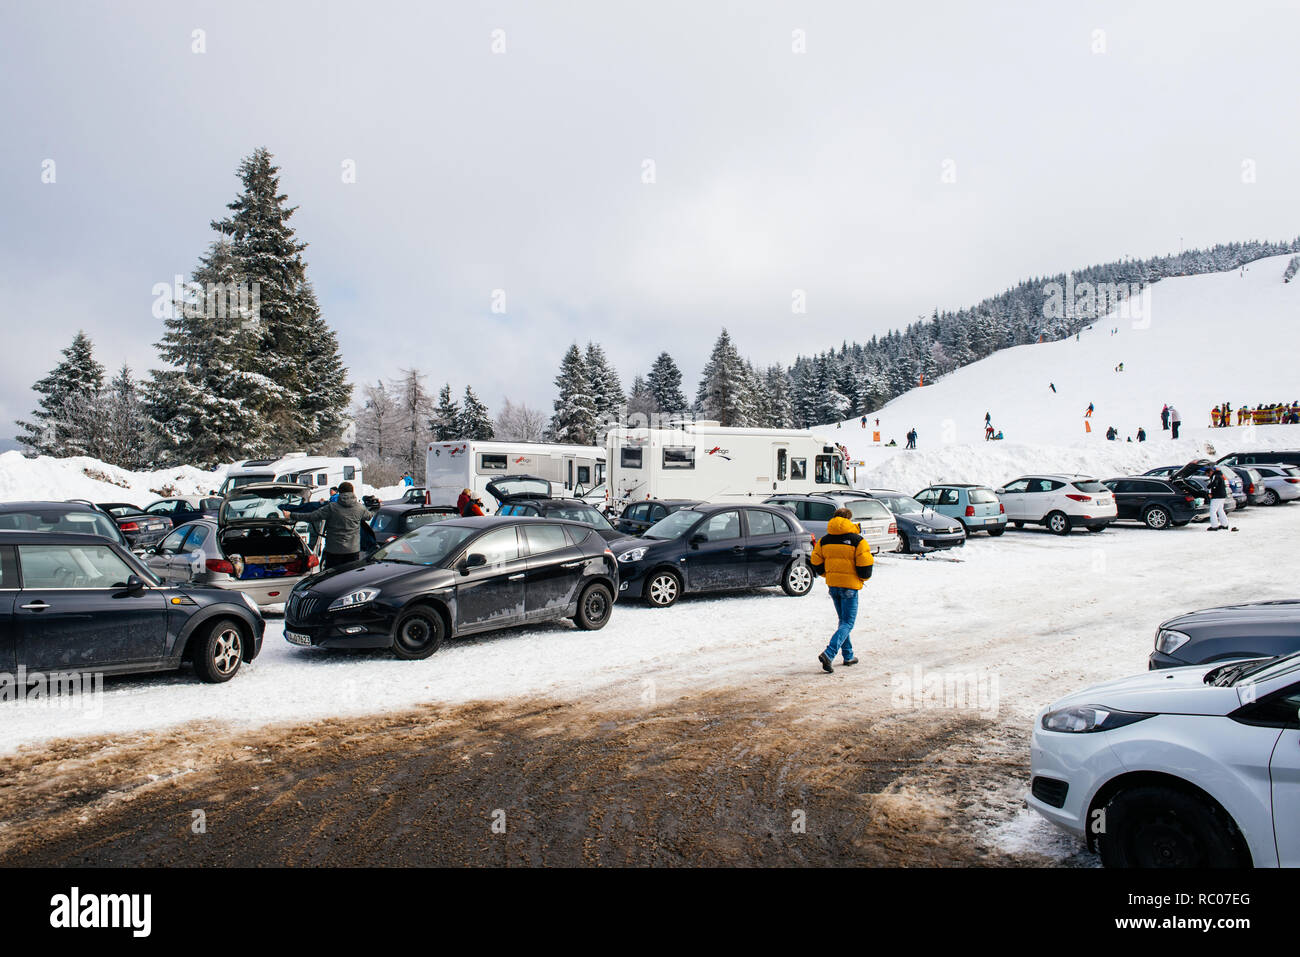 MUMMELSEE, GERMANY - FEB 18, 2018: Winter day with snow and ski slope seen from parking area with kids, parents having fun in German mountains Stock Photo